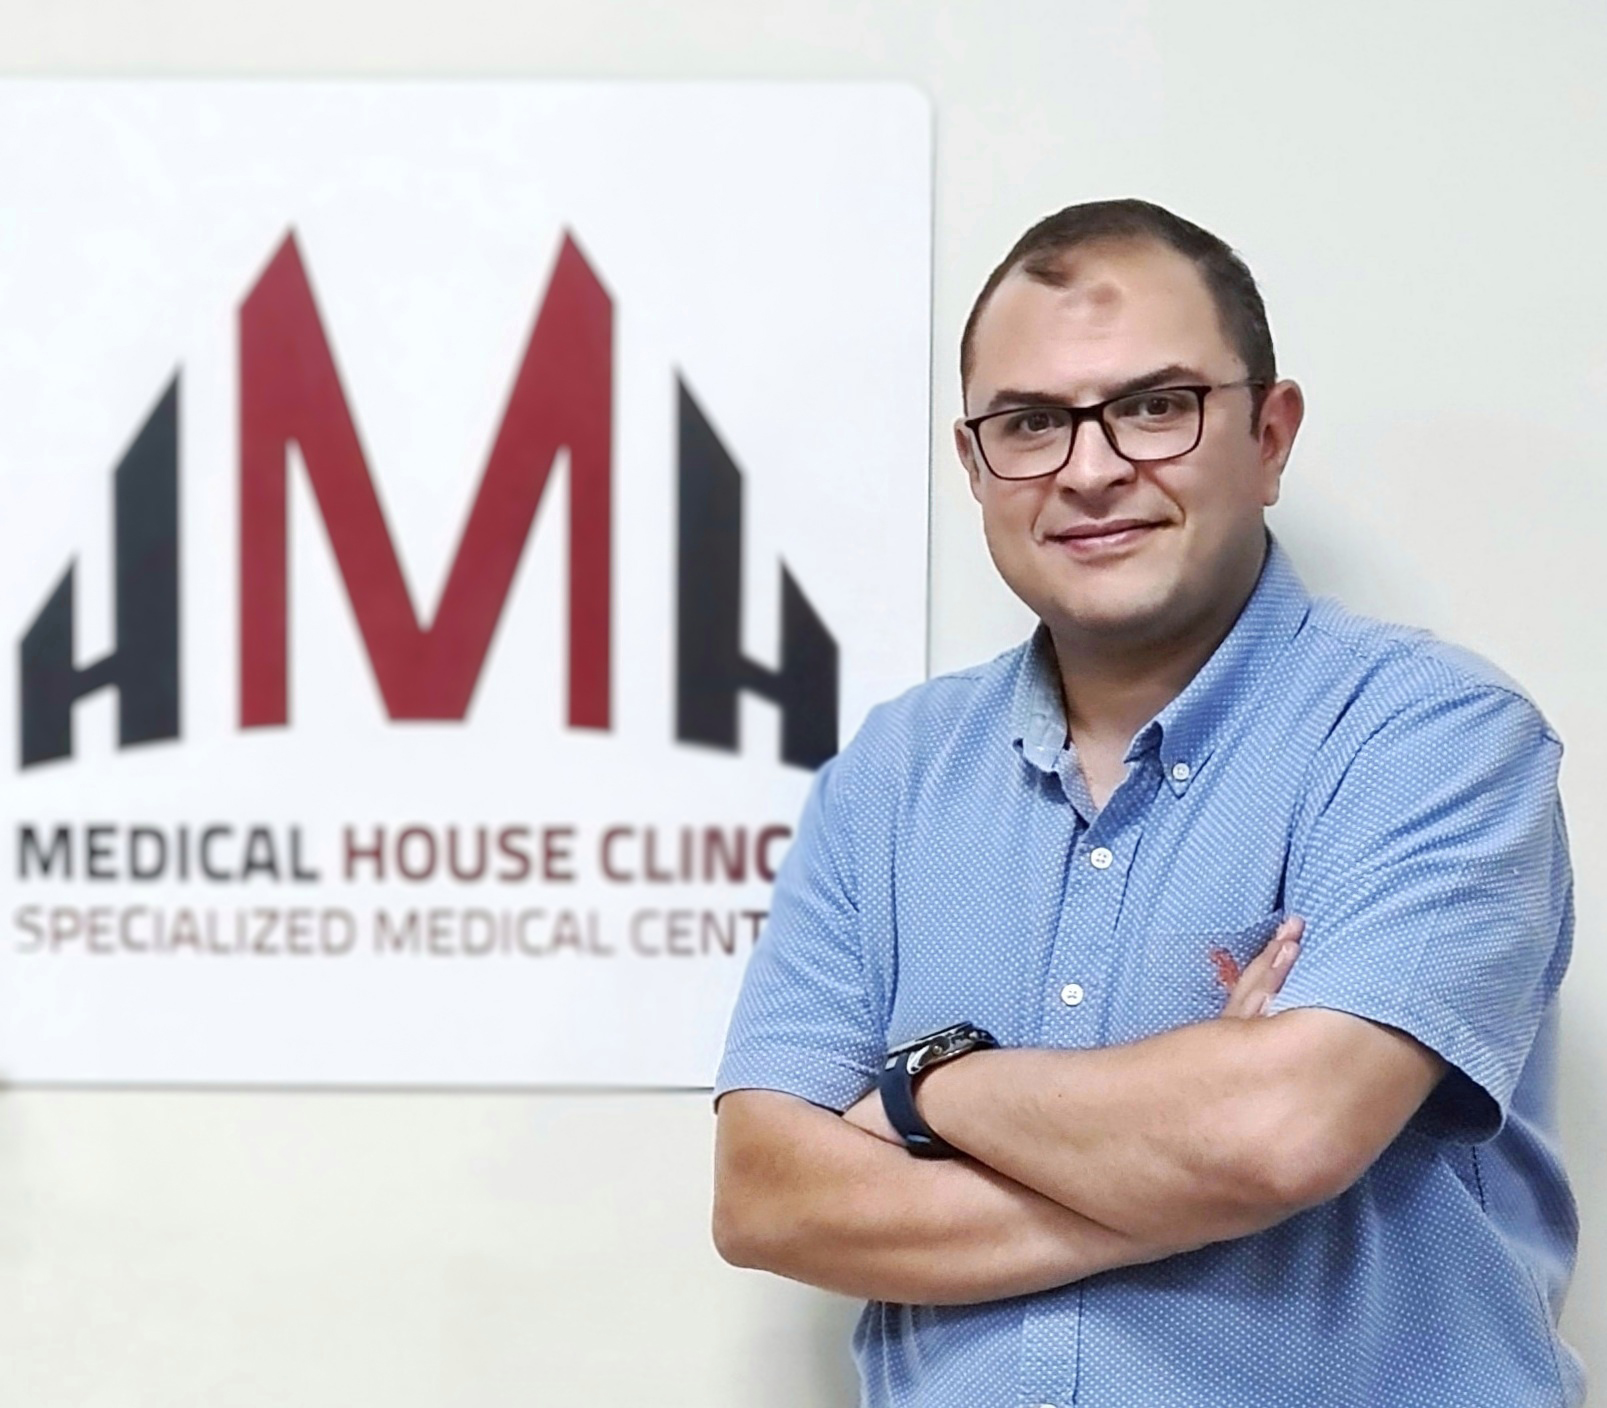 Dr. Ahmed Magdy